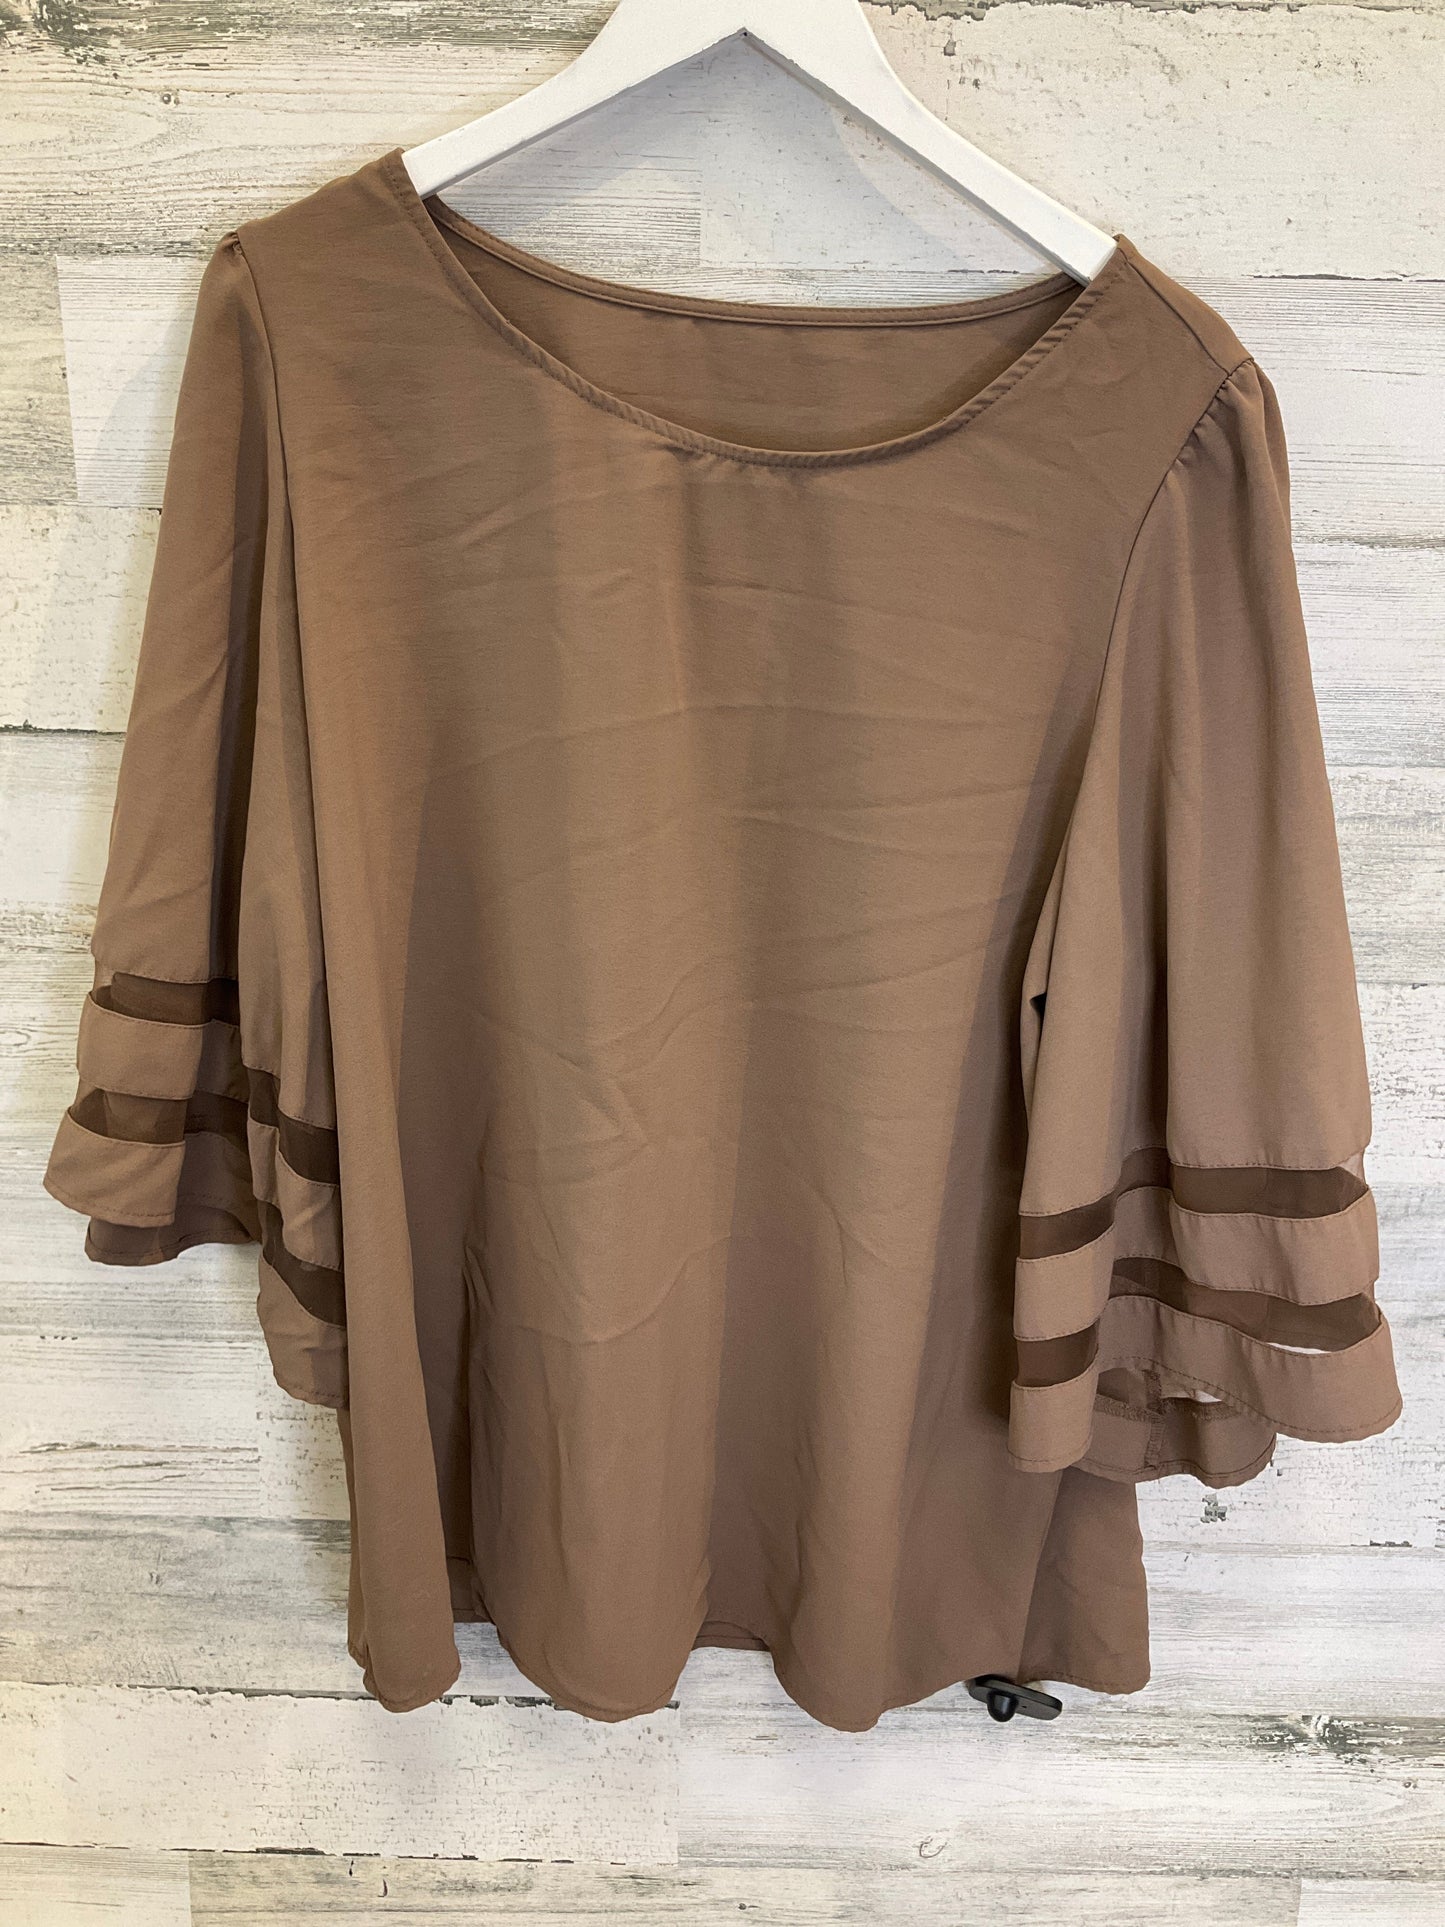 Brown Top Short Sleeve Clothes Mentor, Size 2x